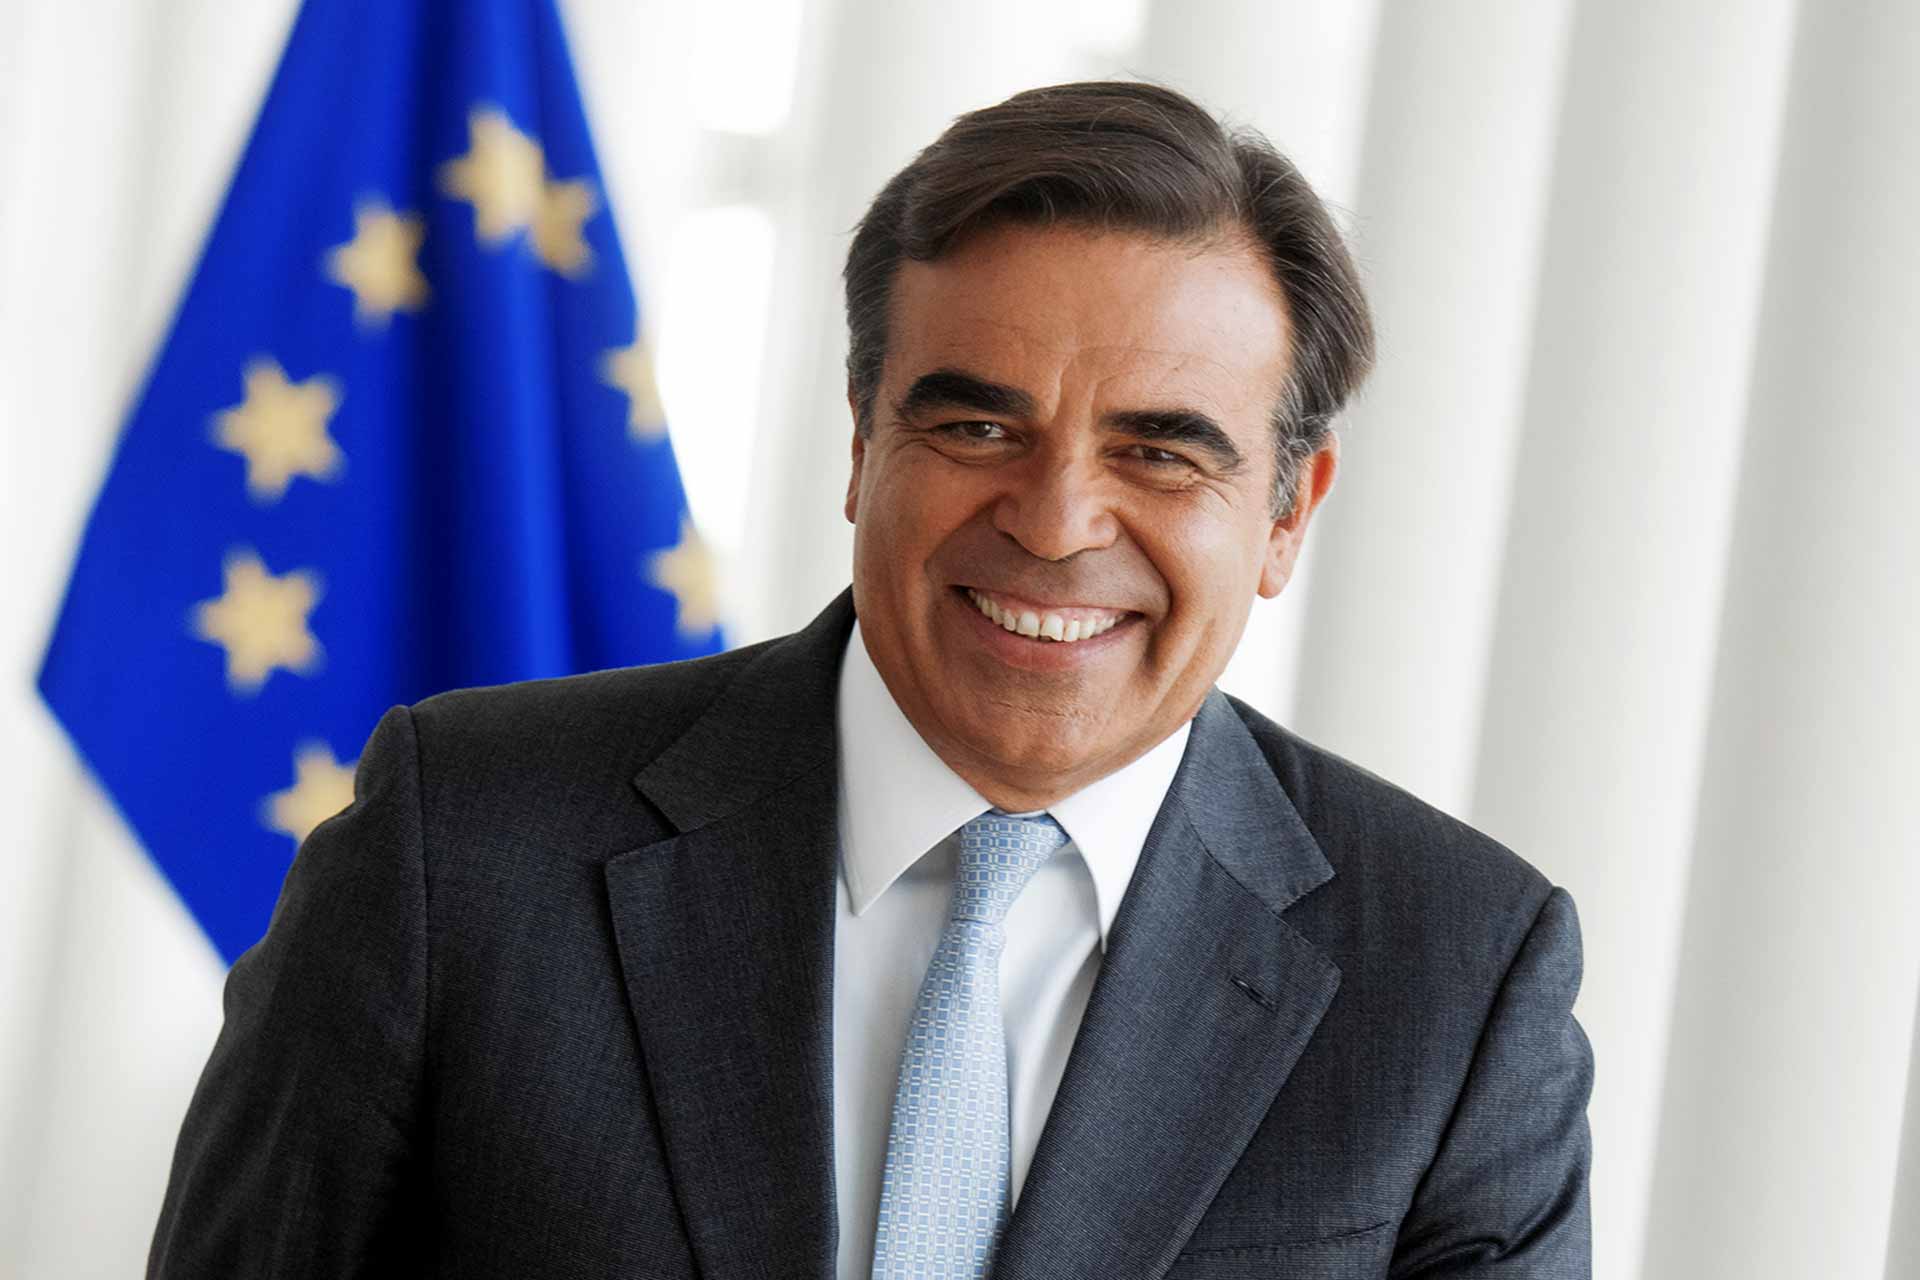 Margaritis Schinas Vice-President for Protecting our European way of life